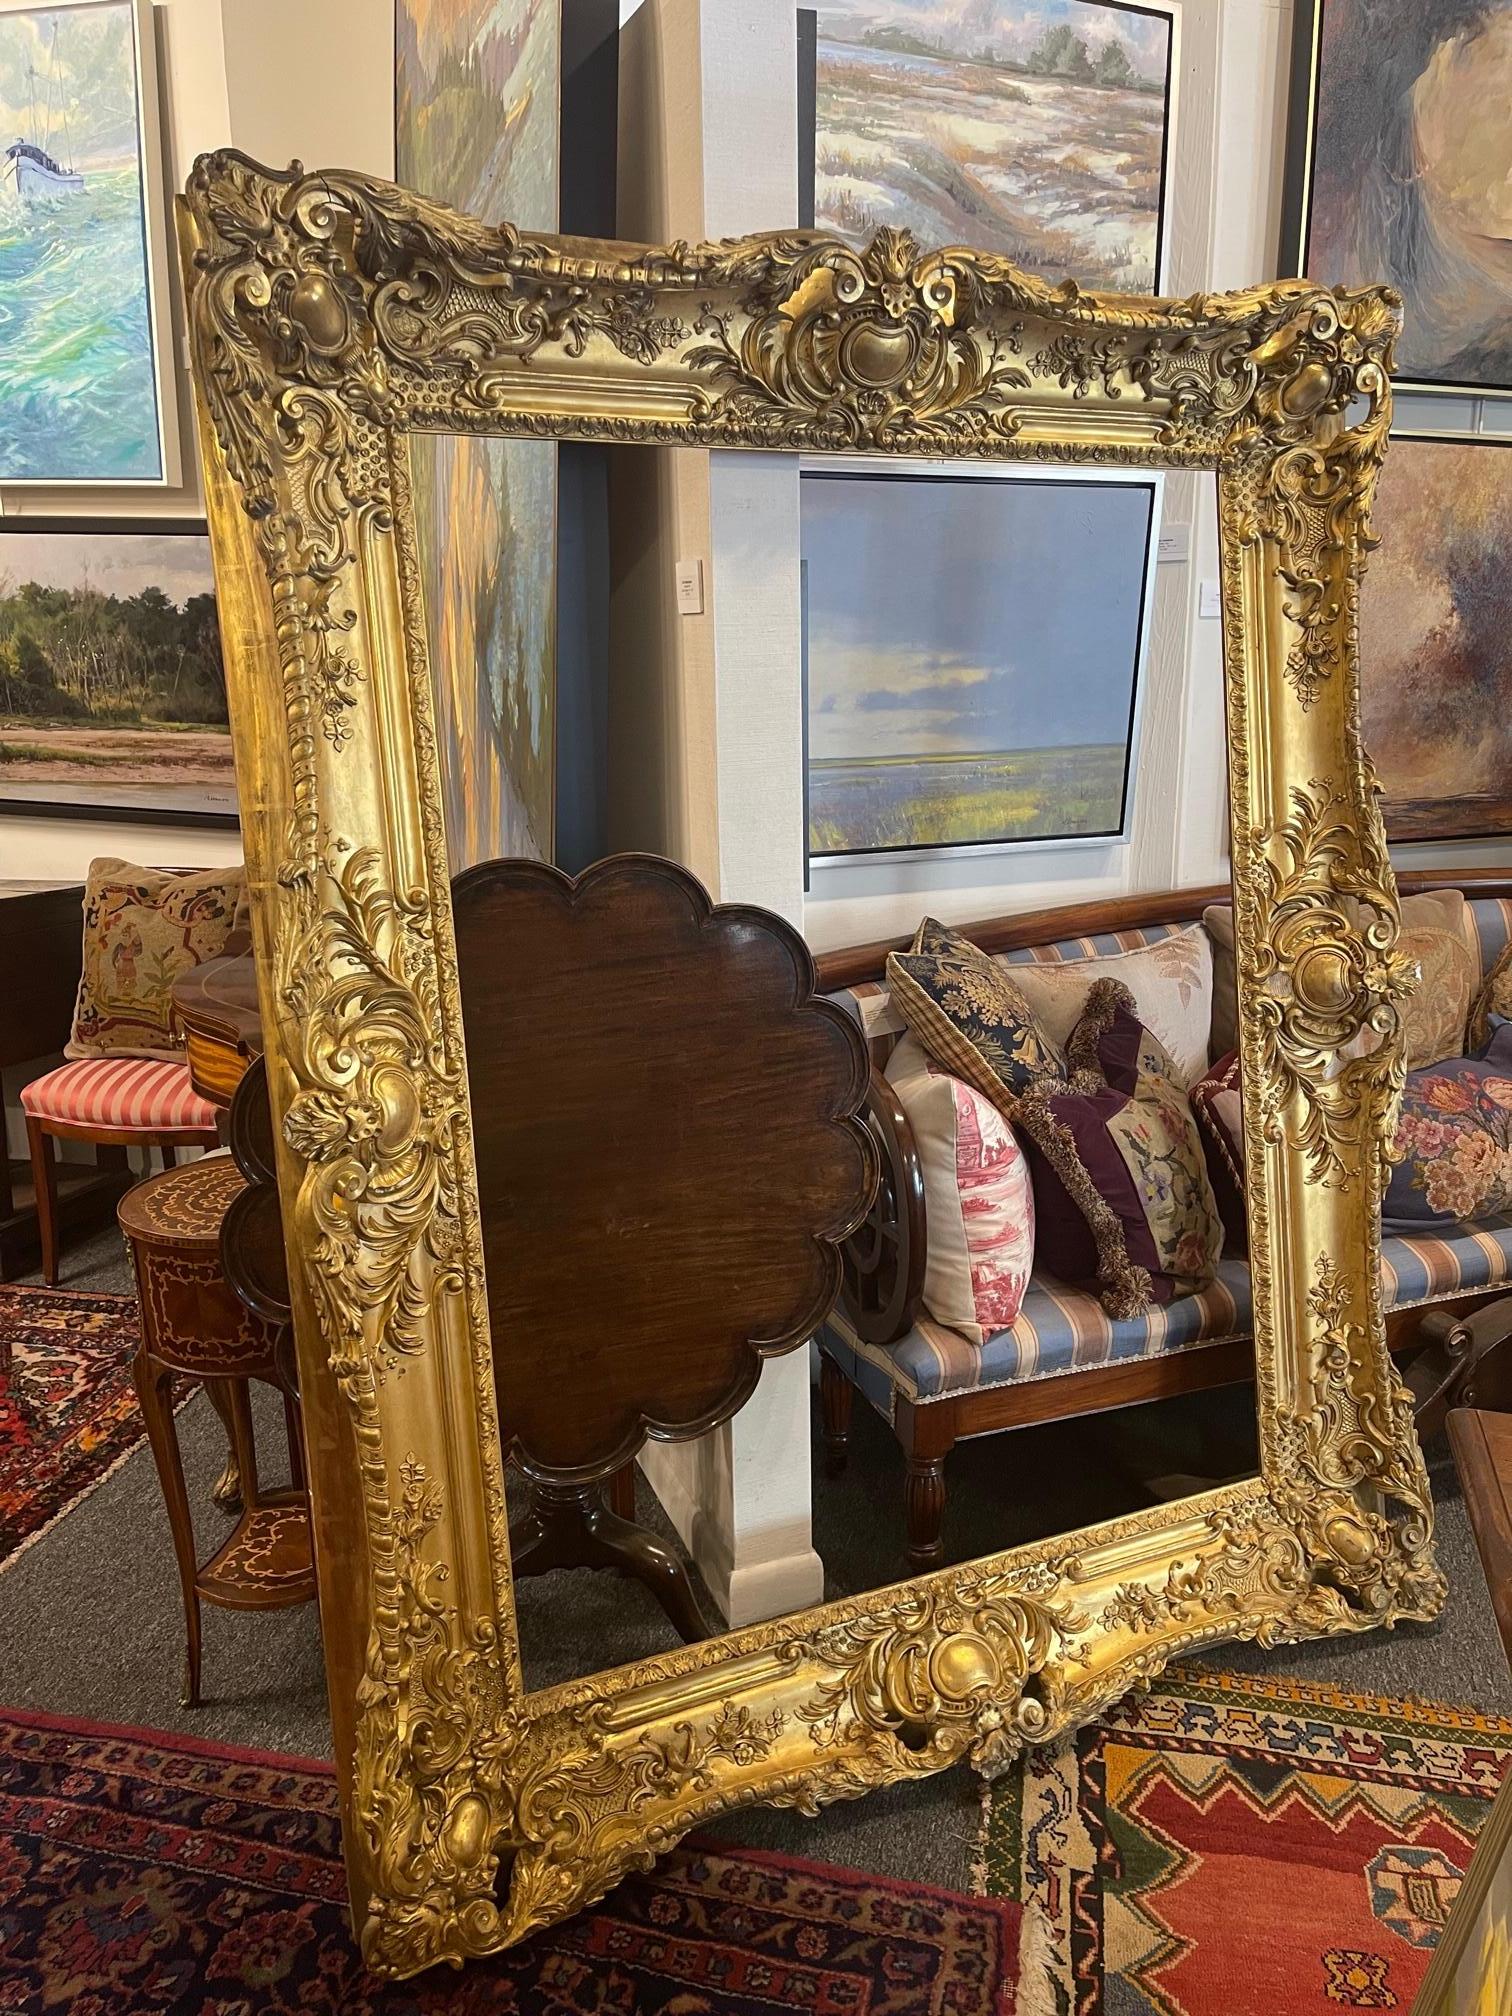 Very Large Louis XVI Style Giltwood Frame with Decorative Carved Designs, Early 20th Century.  Fantastic frame that could be use as is to be a piece of art on the wall or add a painting or a mirror plate.

Could be used horizontally or vertically